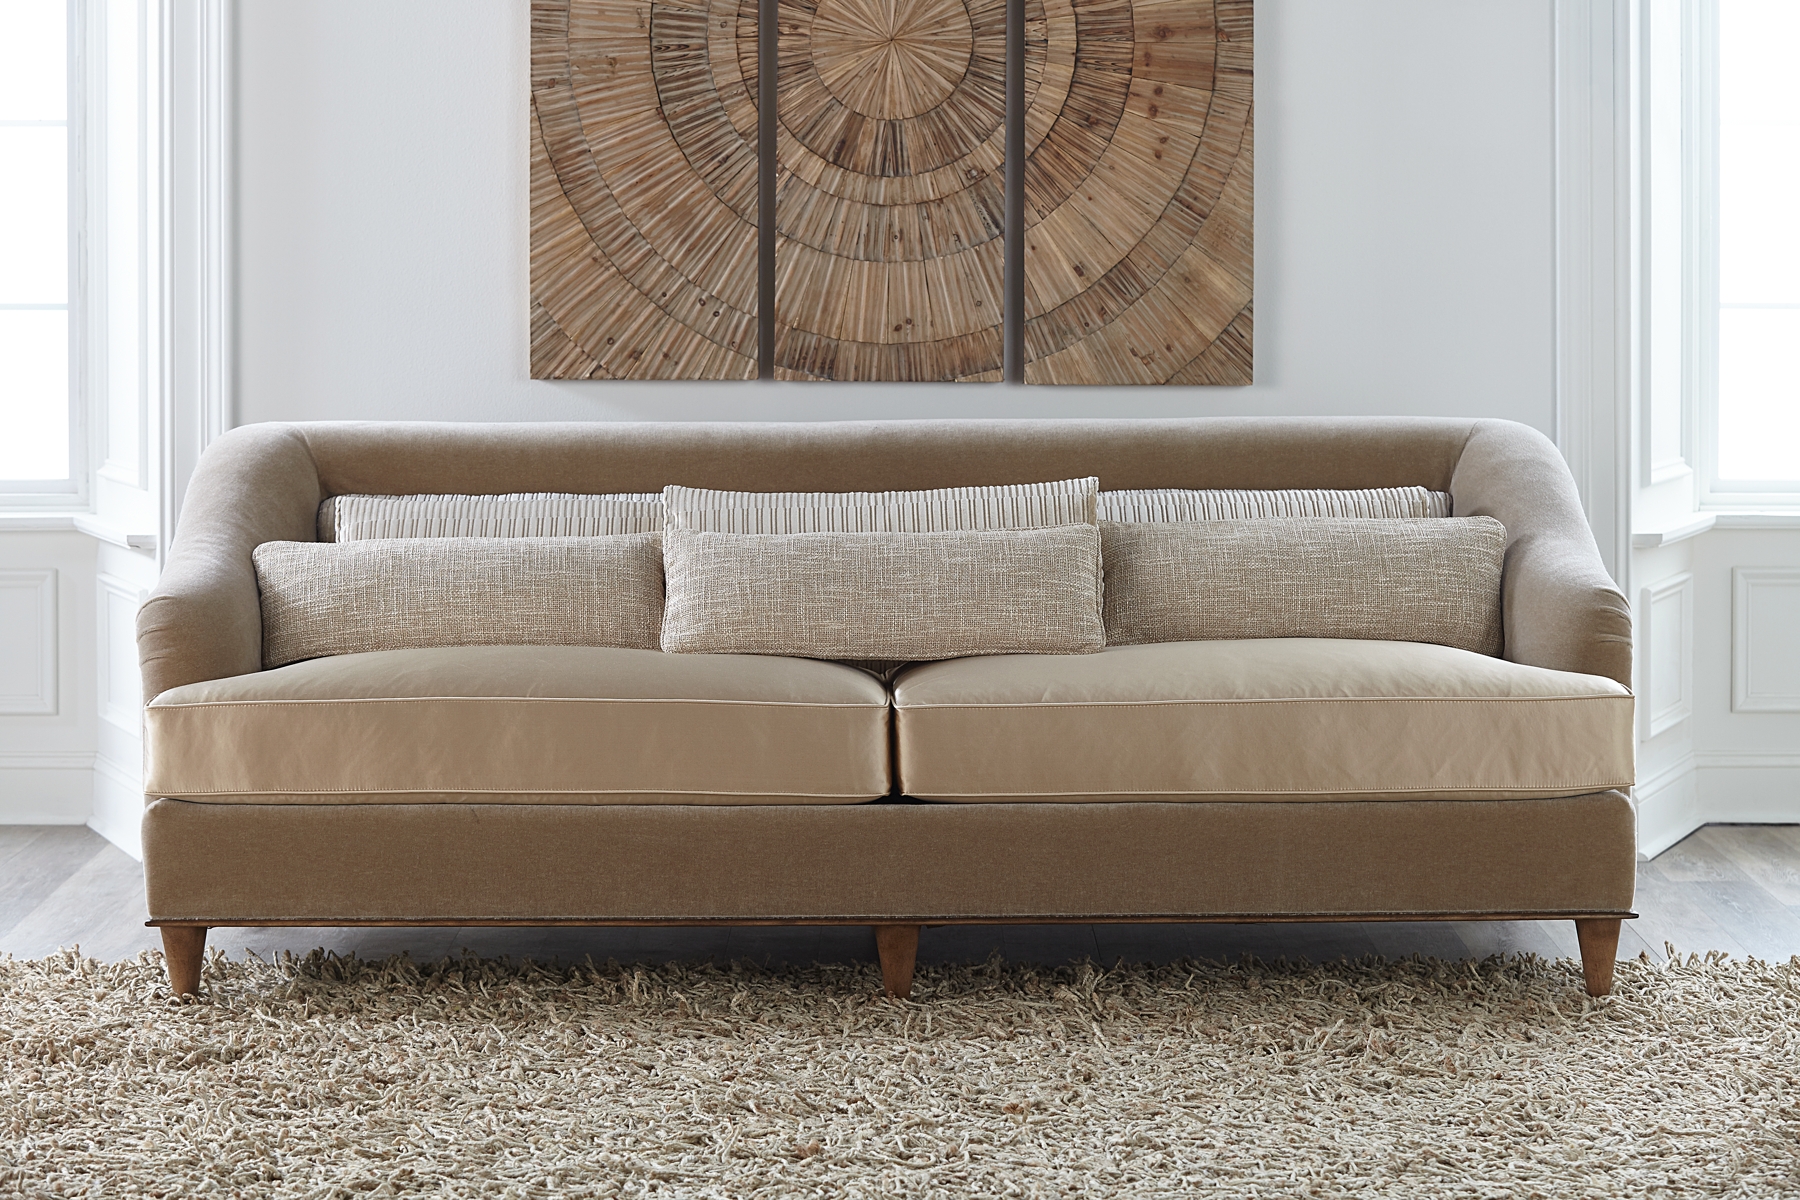 Bruce Andrews Design Hout Bay sofa in the Azure Collection